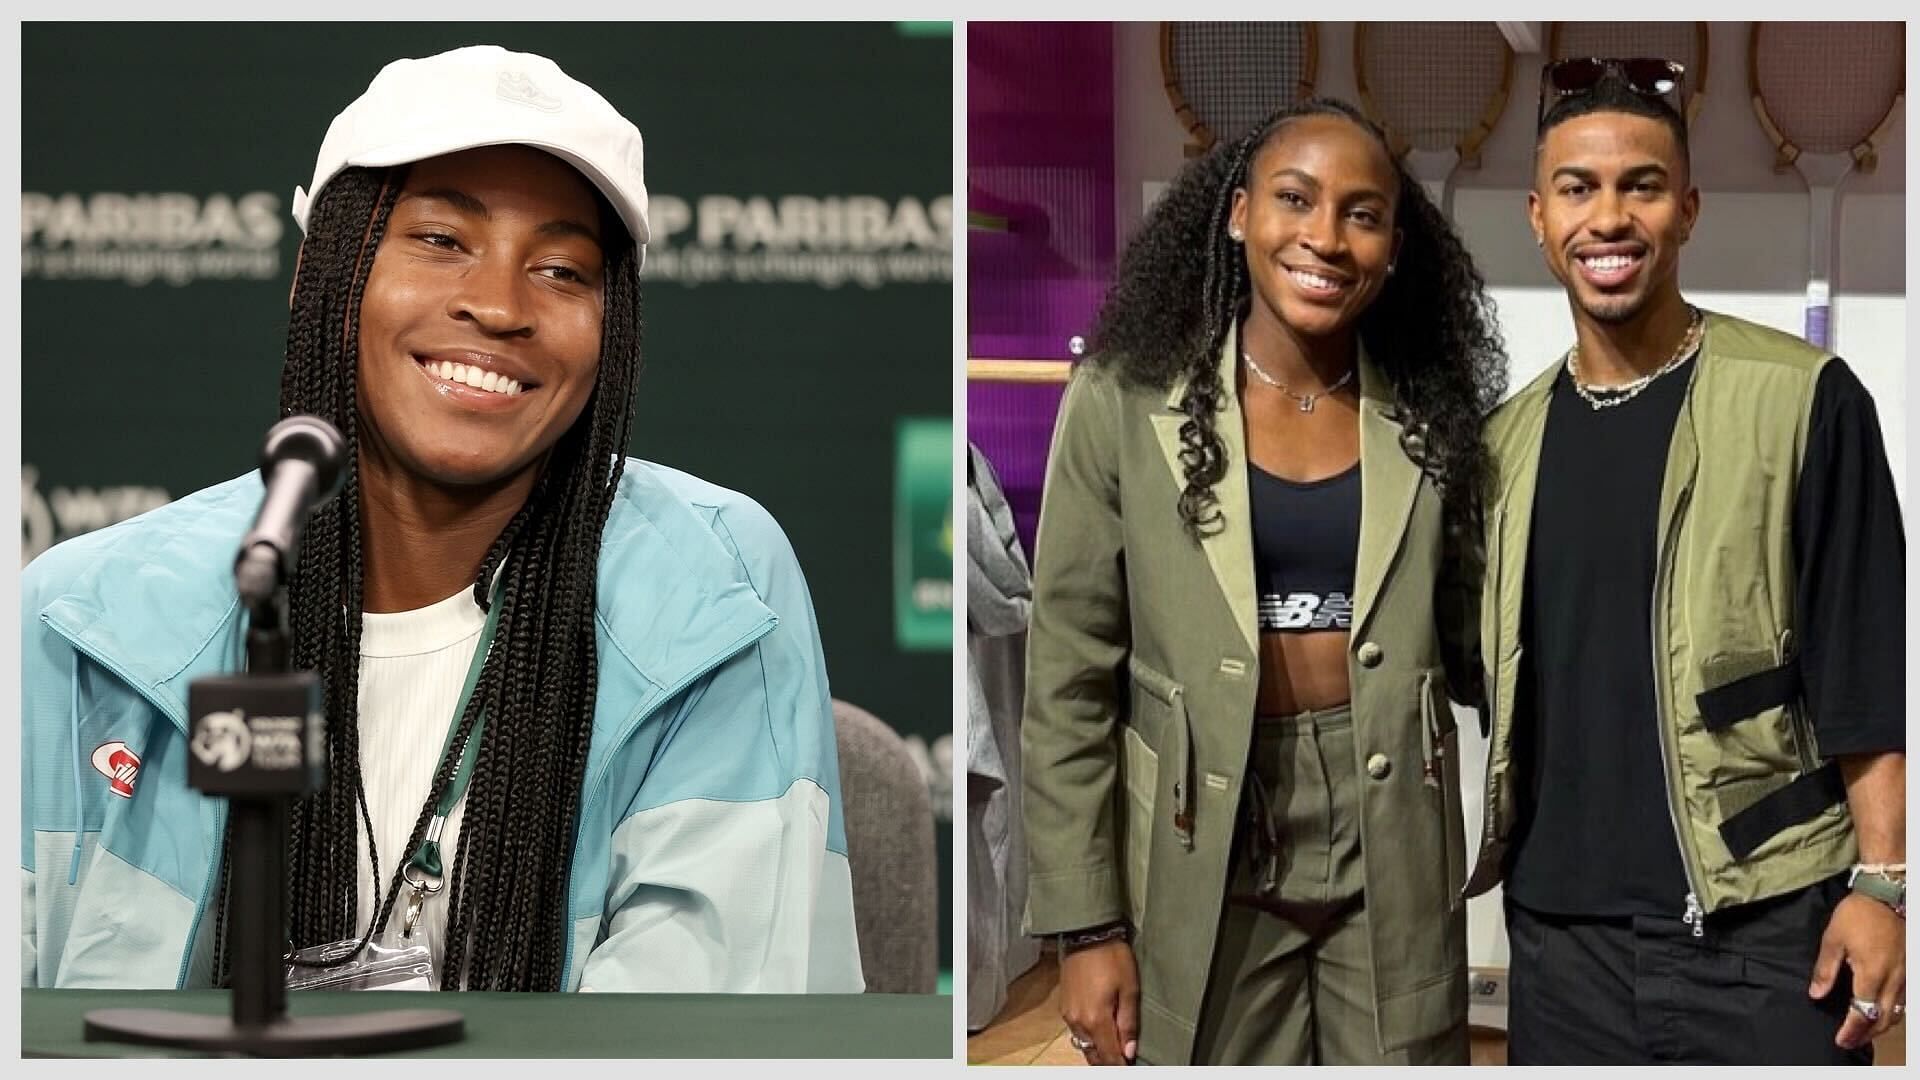 Coco Gauff(left) with Francisco Lindor(right)